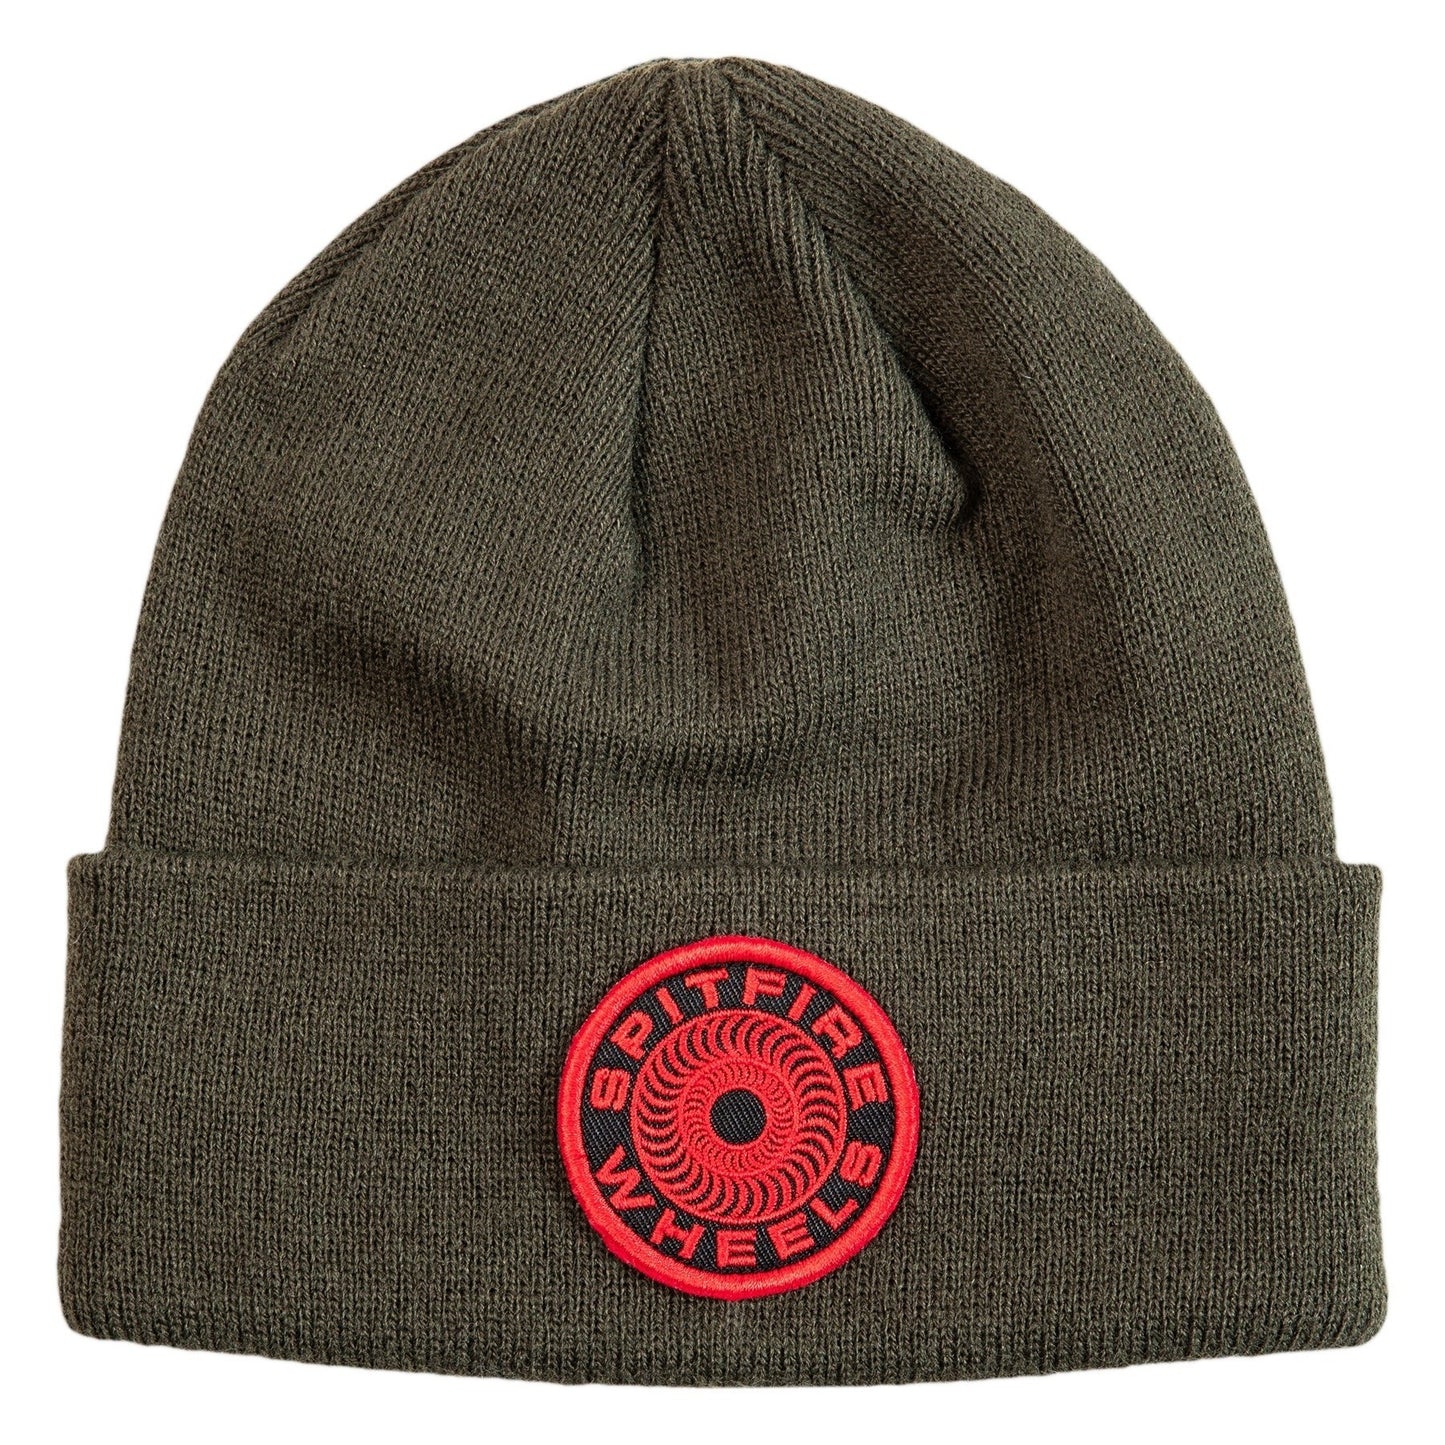 Classic 87' Swirl Patch Beanie (Olive/Red)